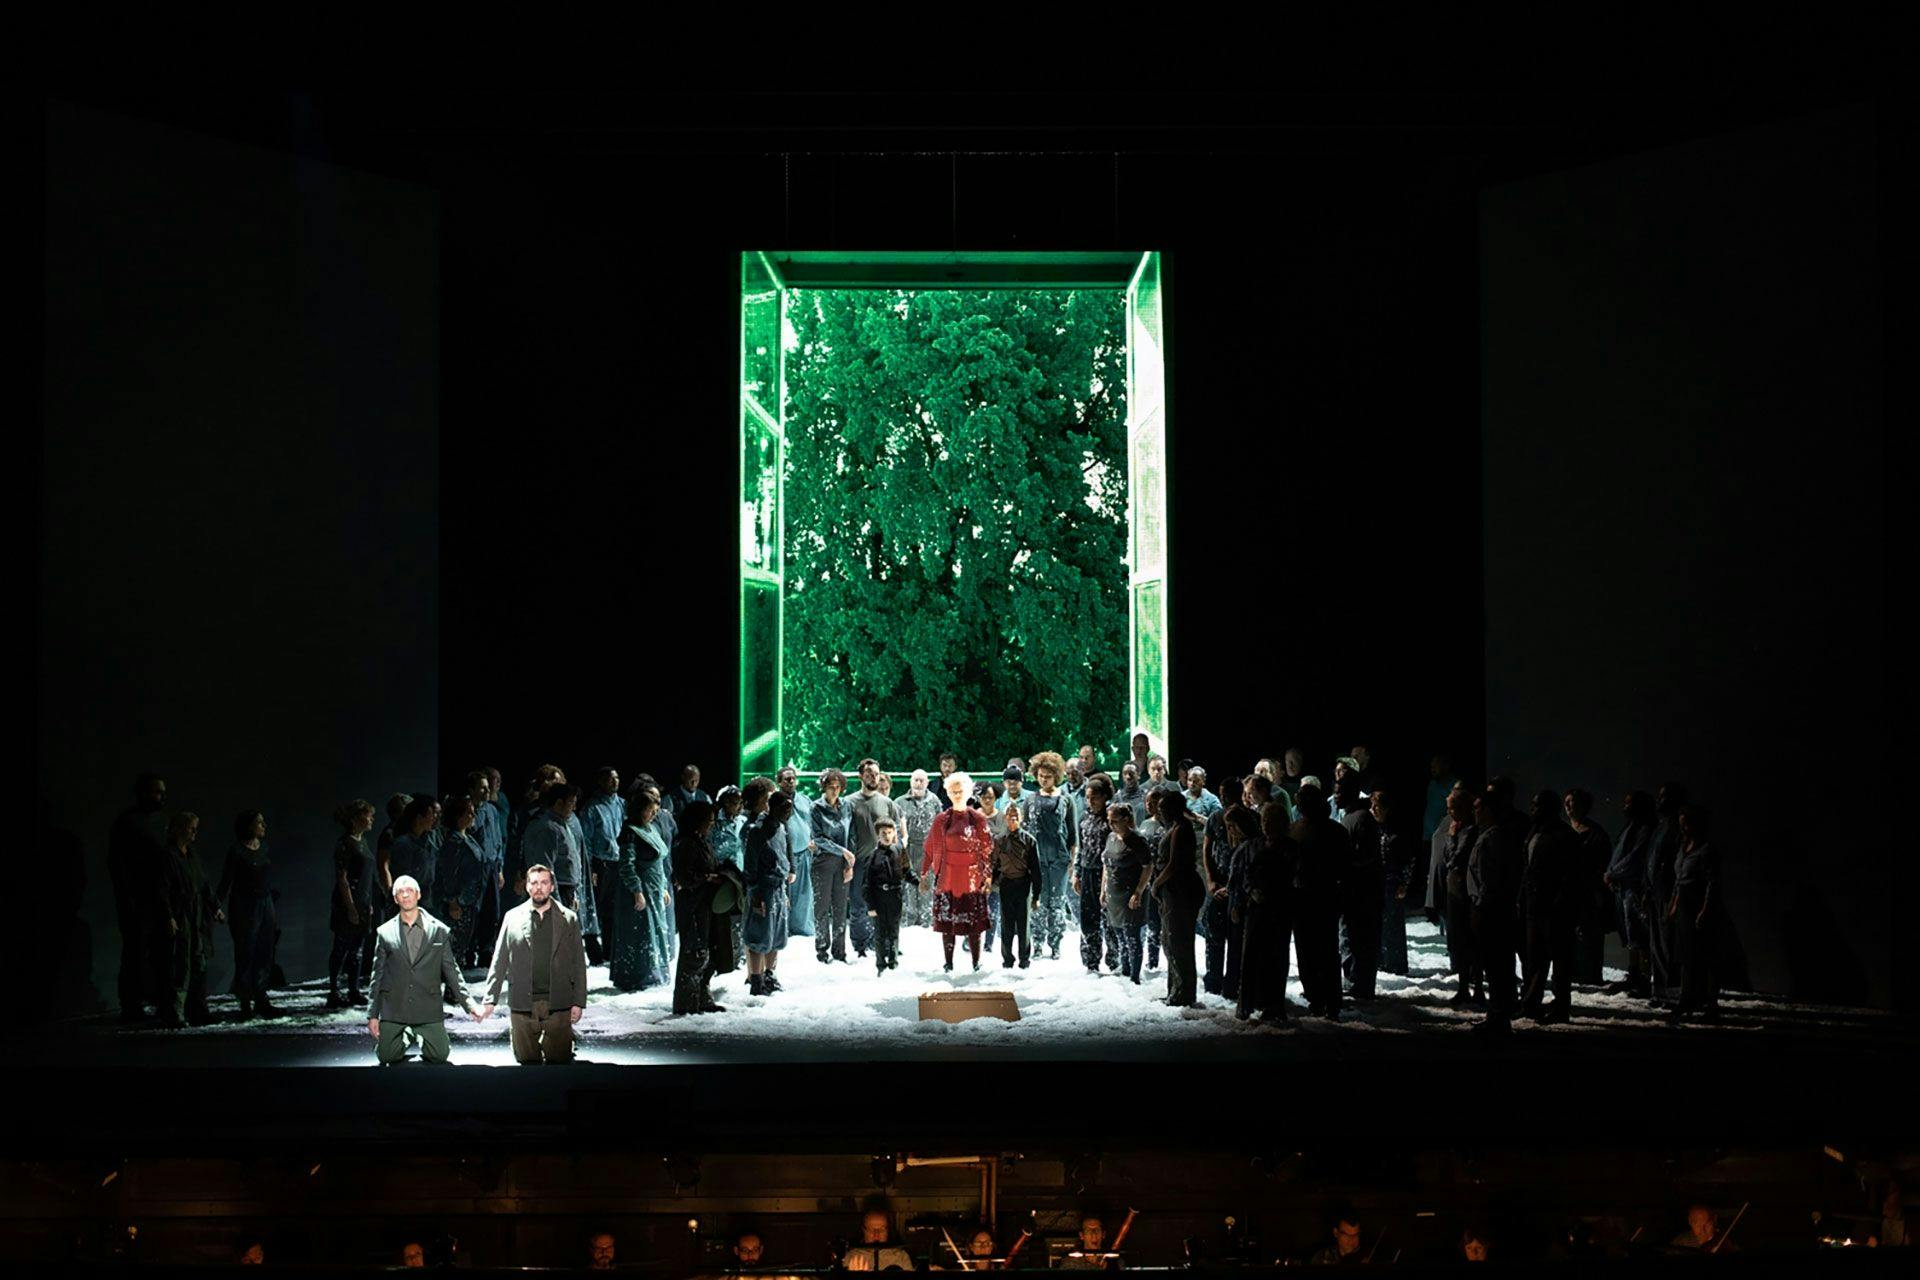 Set design by Wolfgang Tillmans at the English National Opera's performance of War Requiem, at Saint Martin's Lane, in London, dated November 2018.